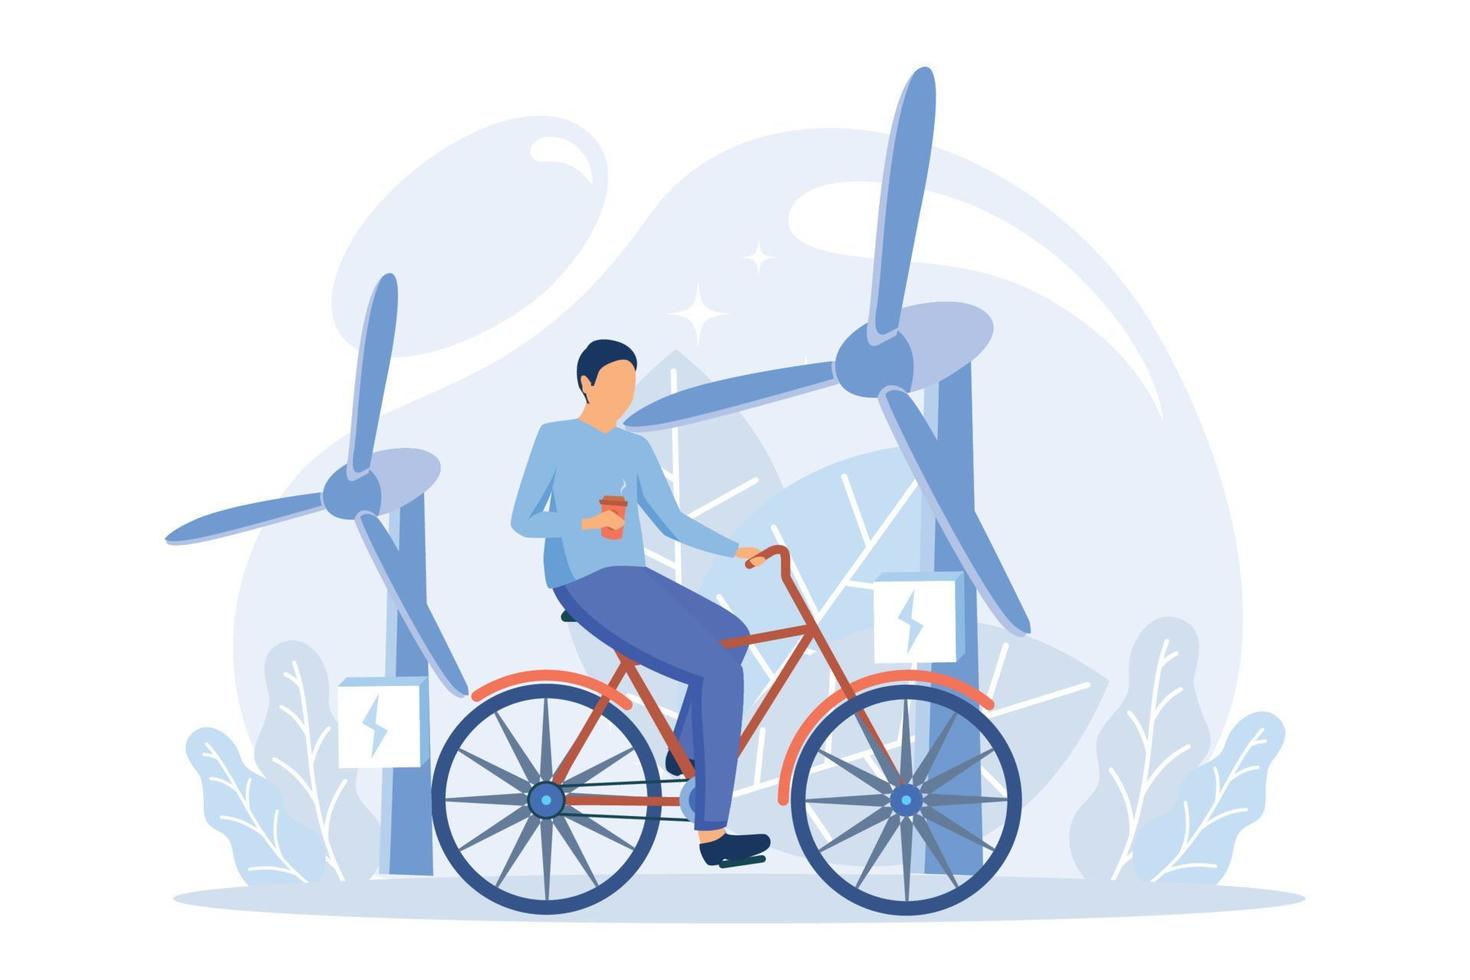 Circular economy illustration. Sustainable economic growth with renewable energy and natural resources. Green energy, sustainable industry and manufacturing concept. Flat vector modern illustration.